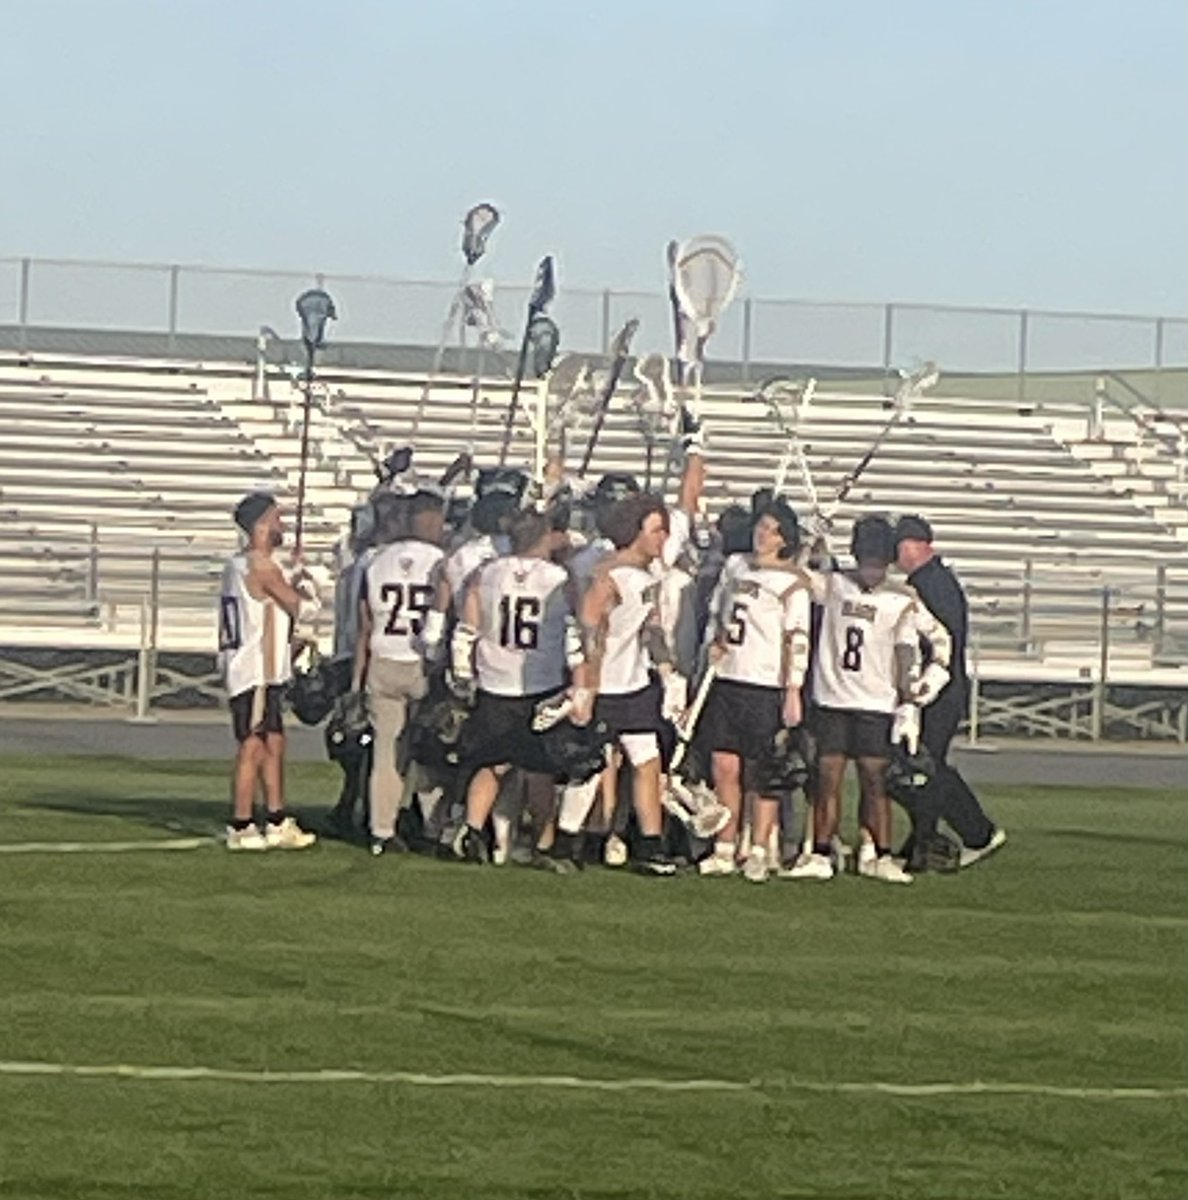 Our Lacrosse Team celebrated their Senior night tonight. They have developed our Lax program to where it is today with the help of our coaches, families, and athletic booster club. It’s TIME CCS to sanction this LAX as a sport. @CumberlandCoSch @BarbourChad @GCAthletics03